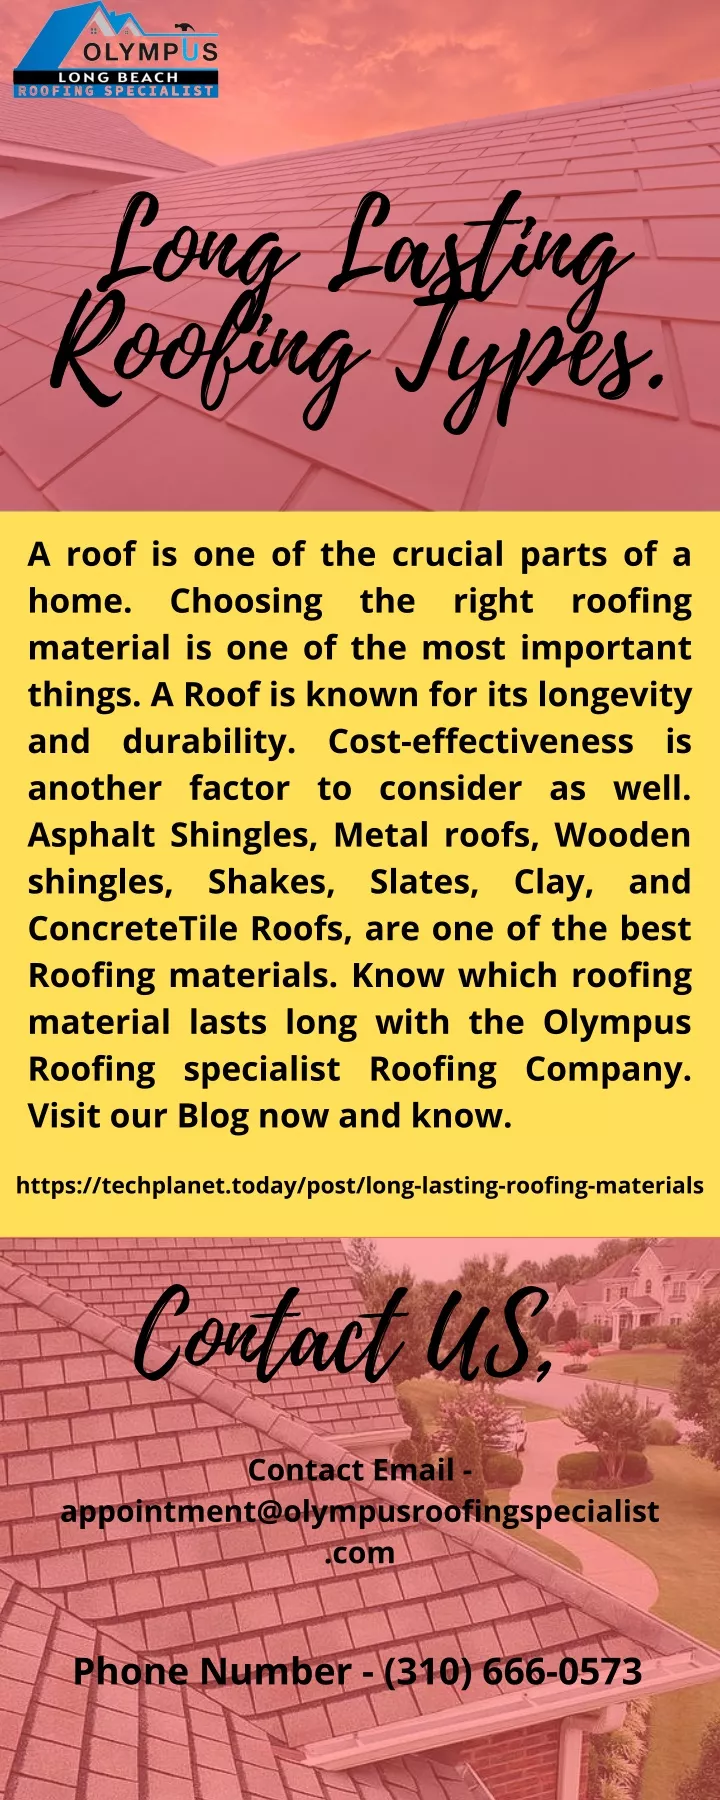 long lasting roofing types